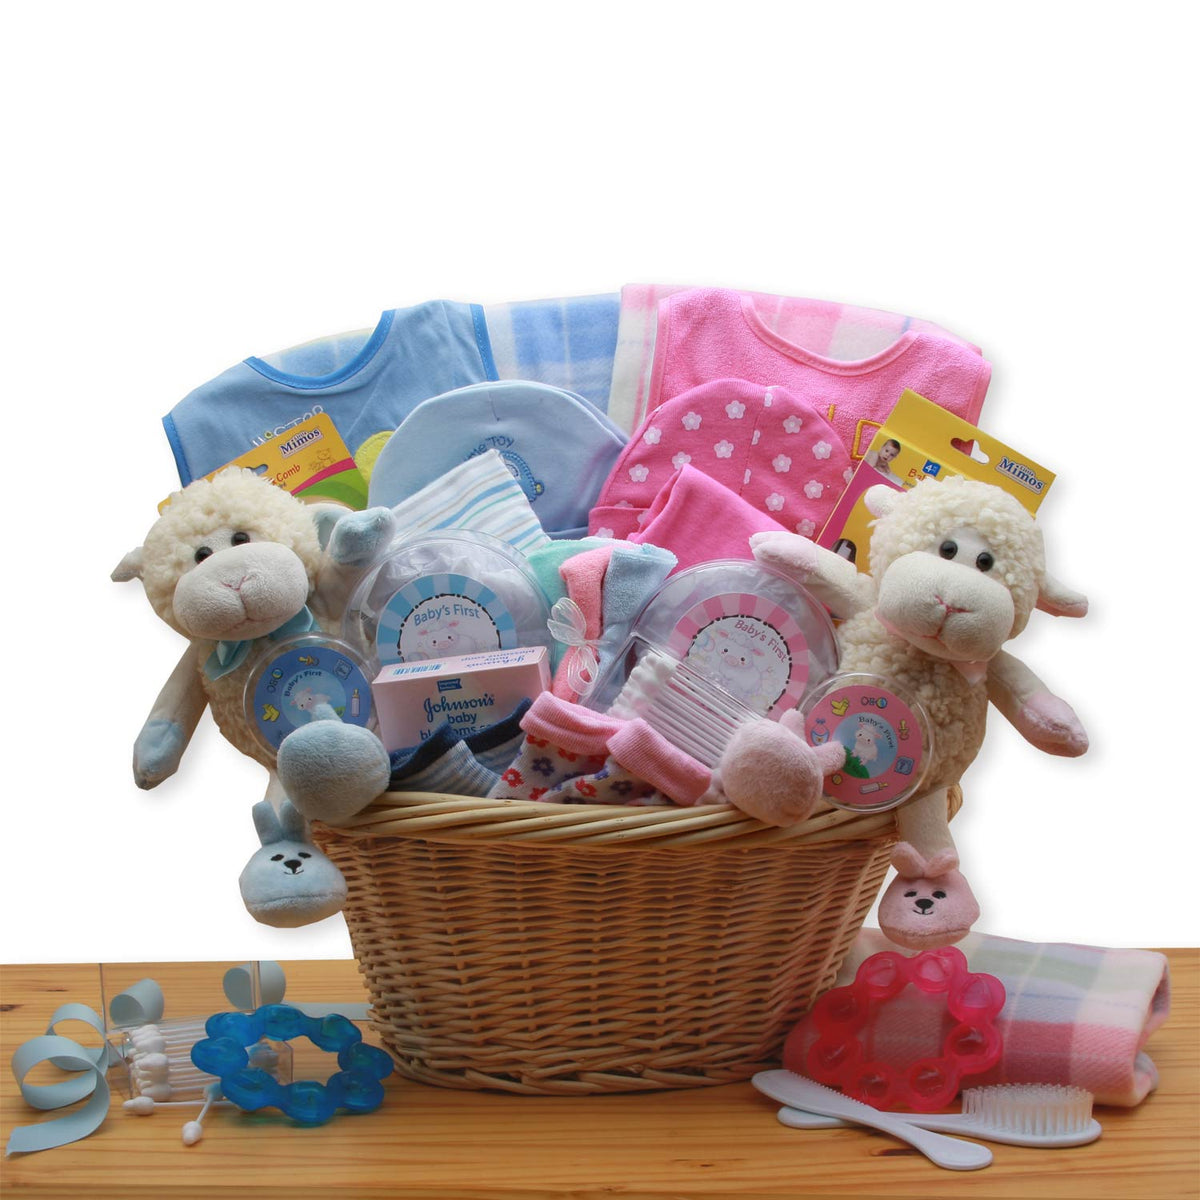 Double Delight Twins New Baby Gift Basket -Pink/Blue